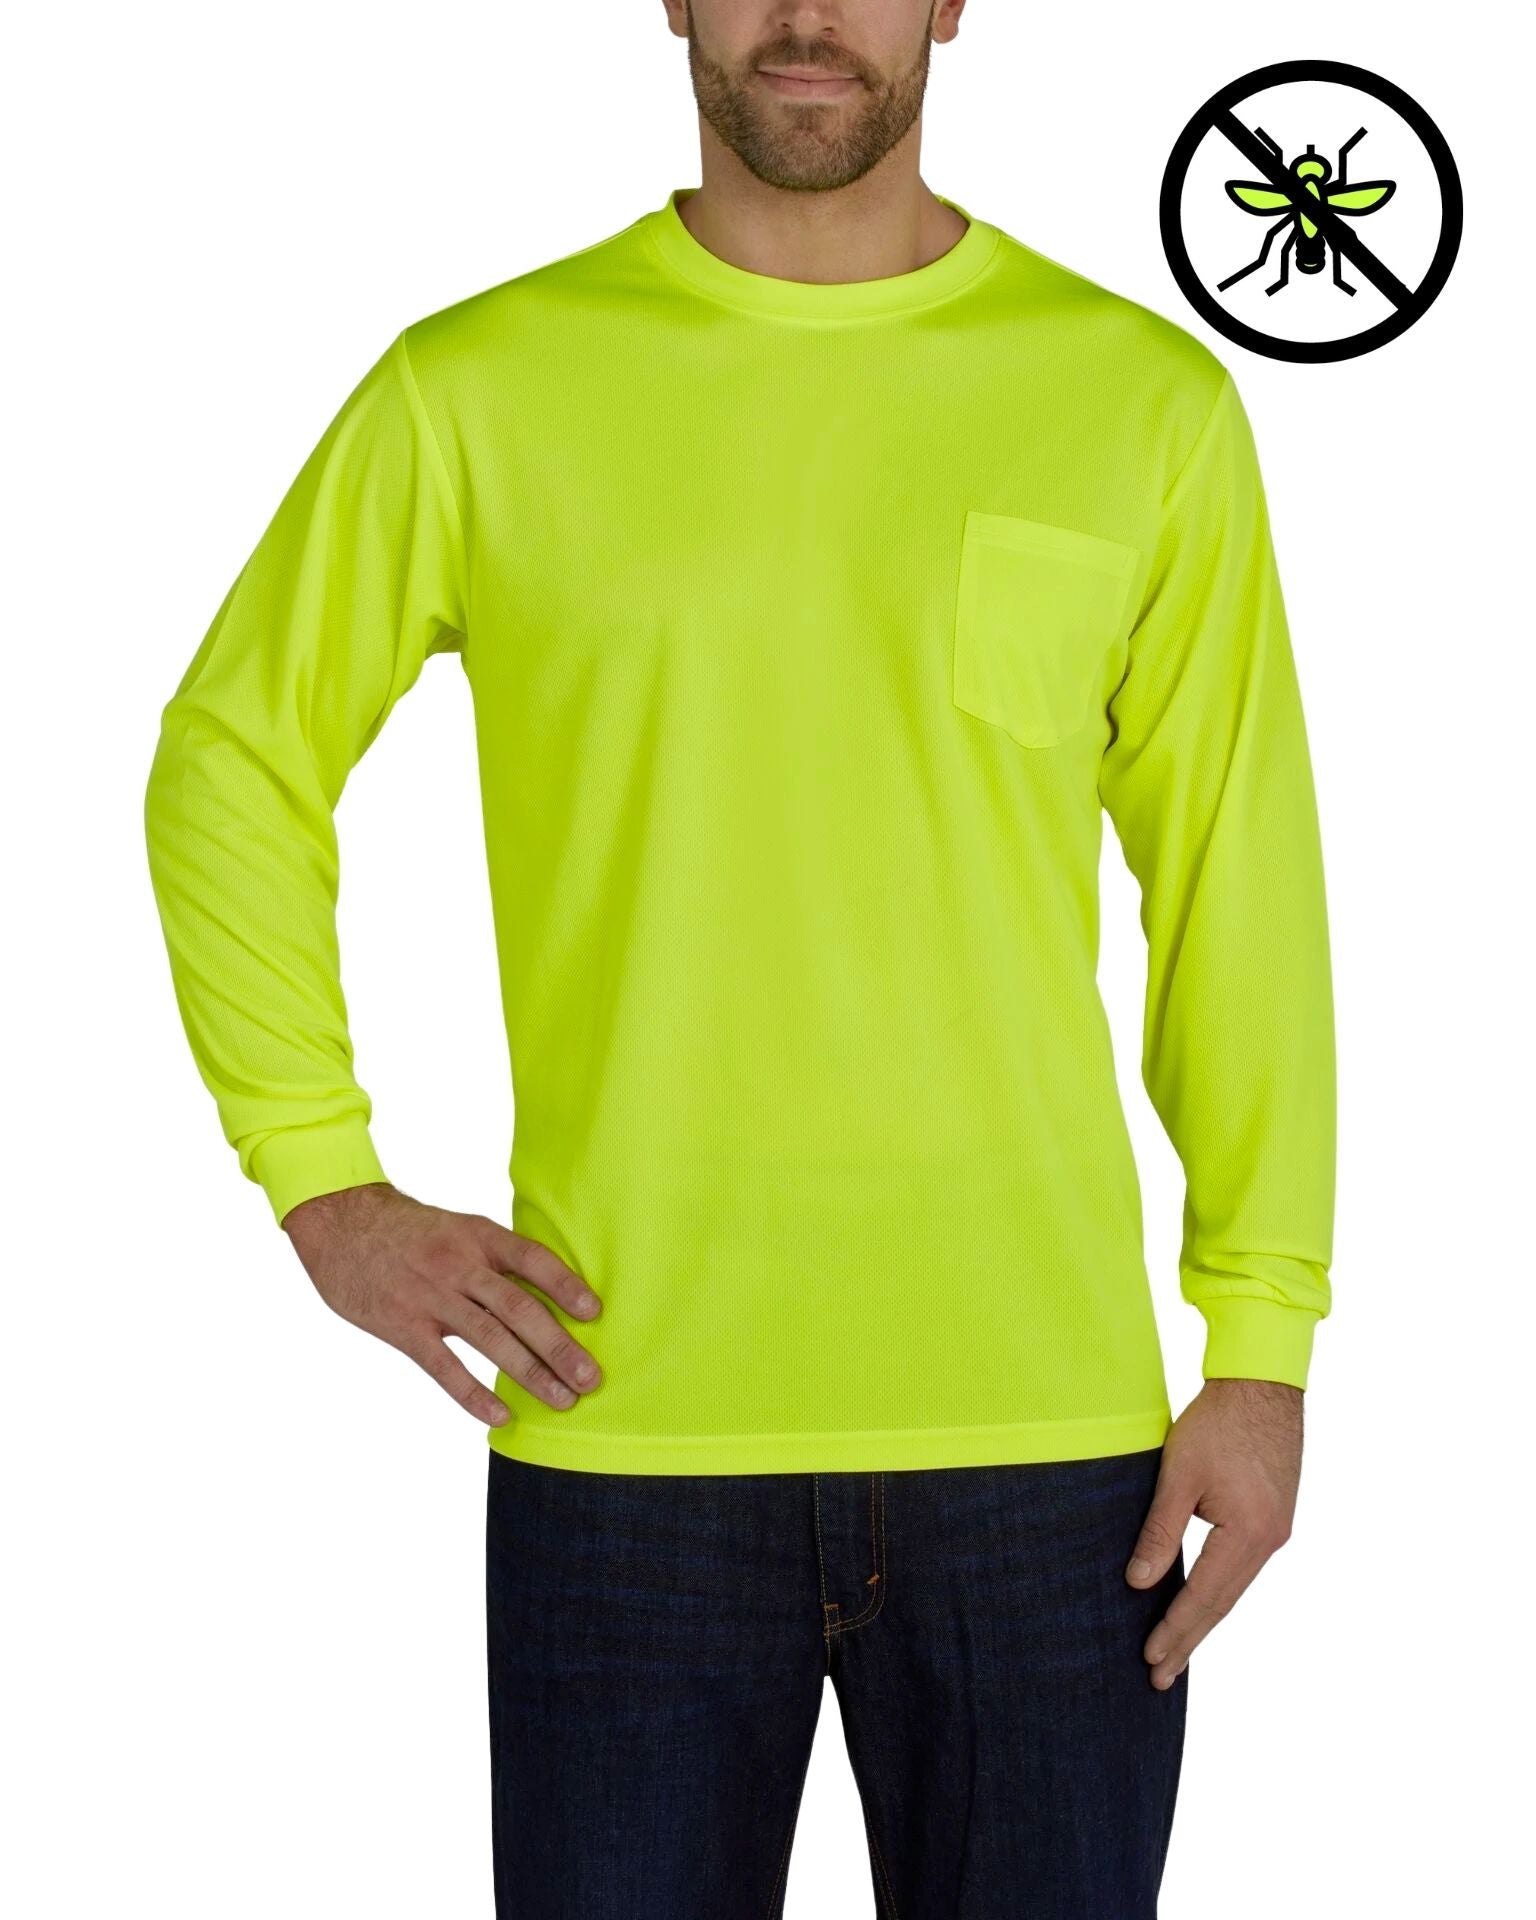 UHV856 Long Sleeve Knit Shirt  - Protected with PERIMETER™ Insect Guard